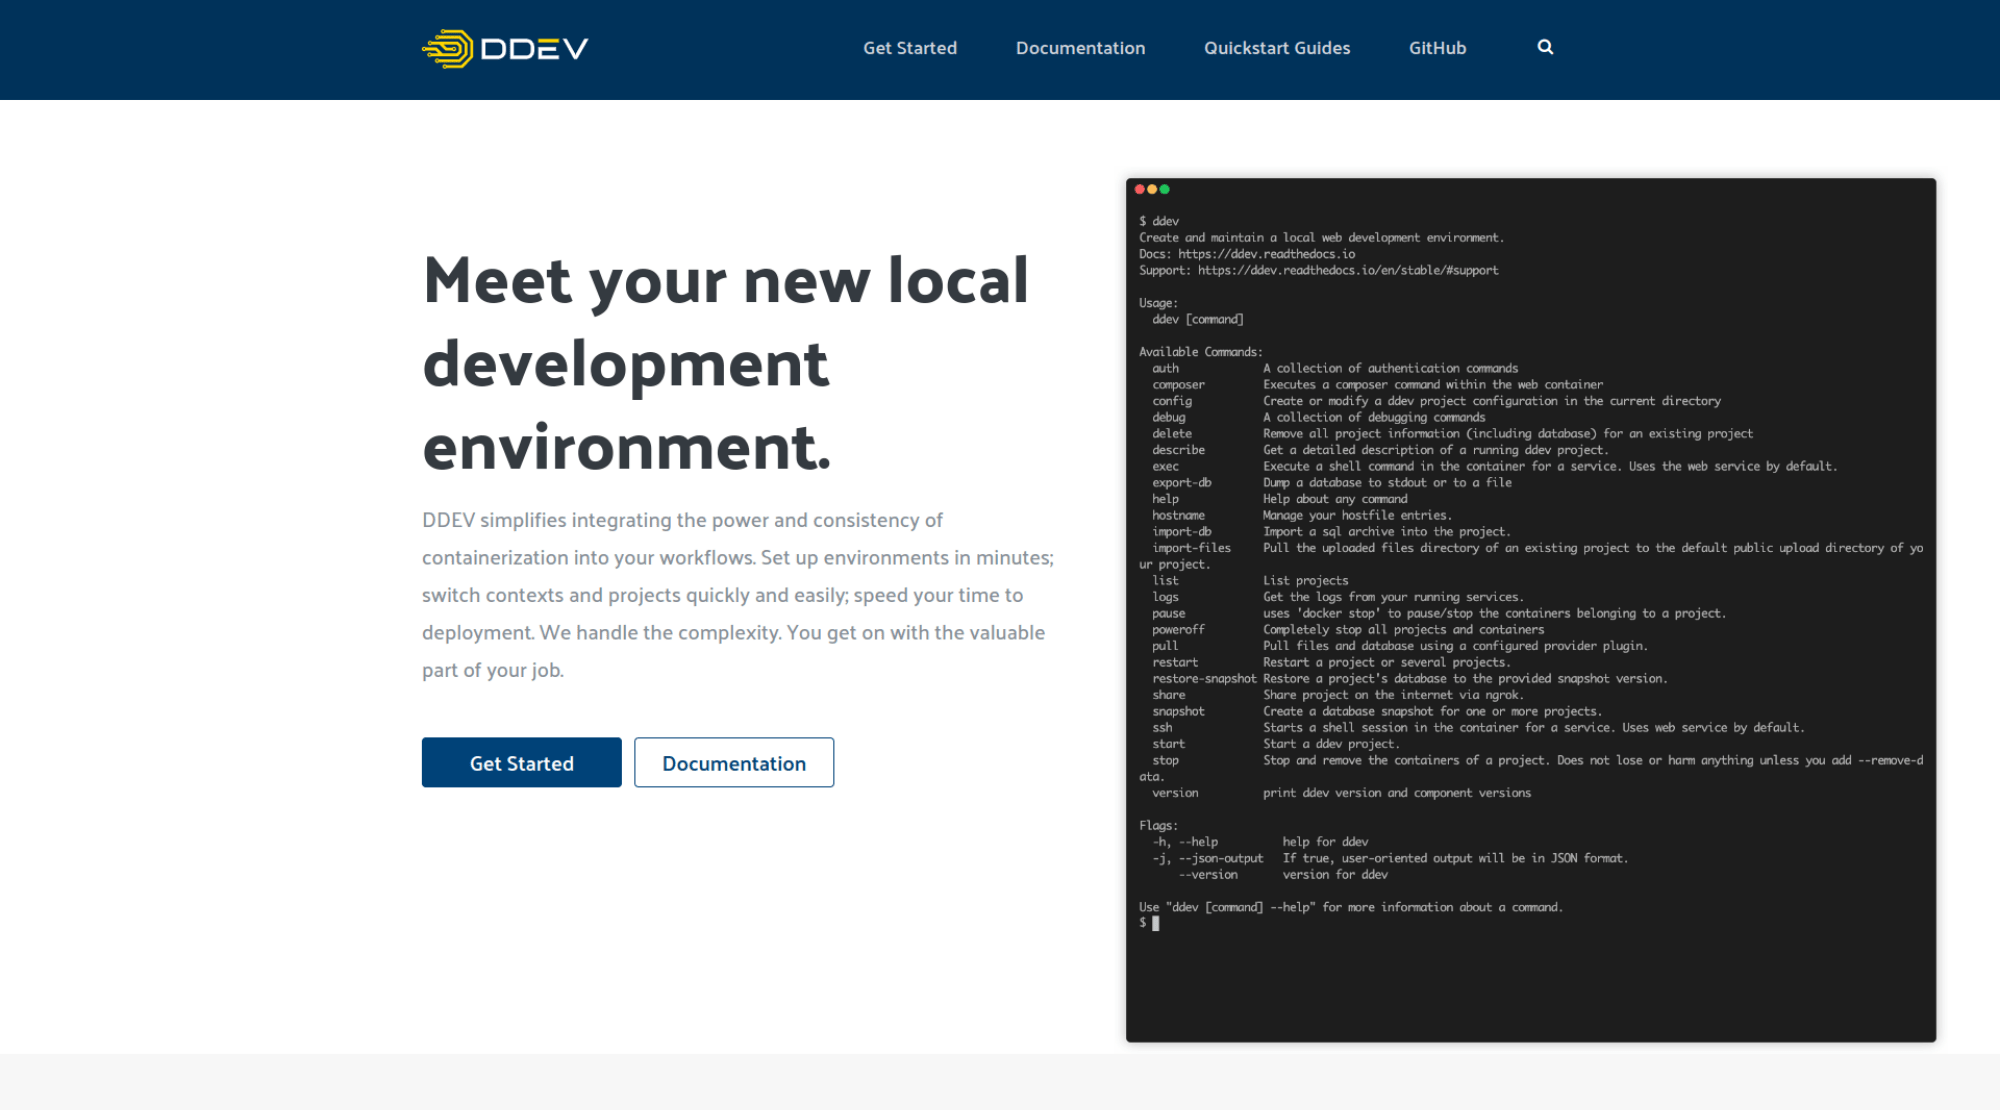 Using DDEV with Joomla for local development